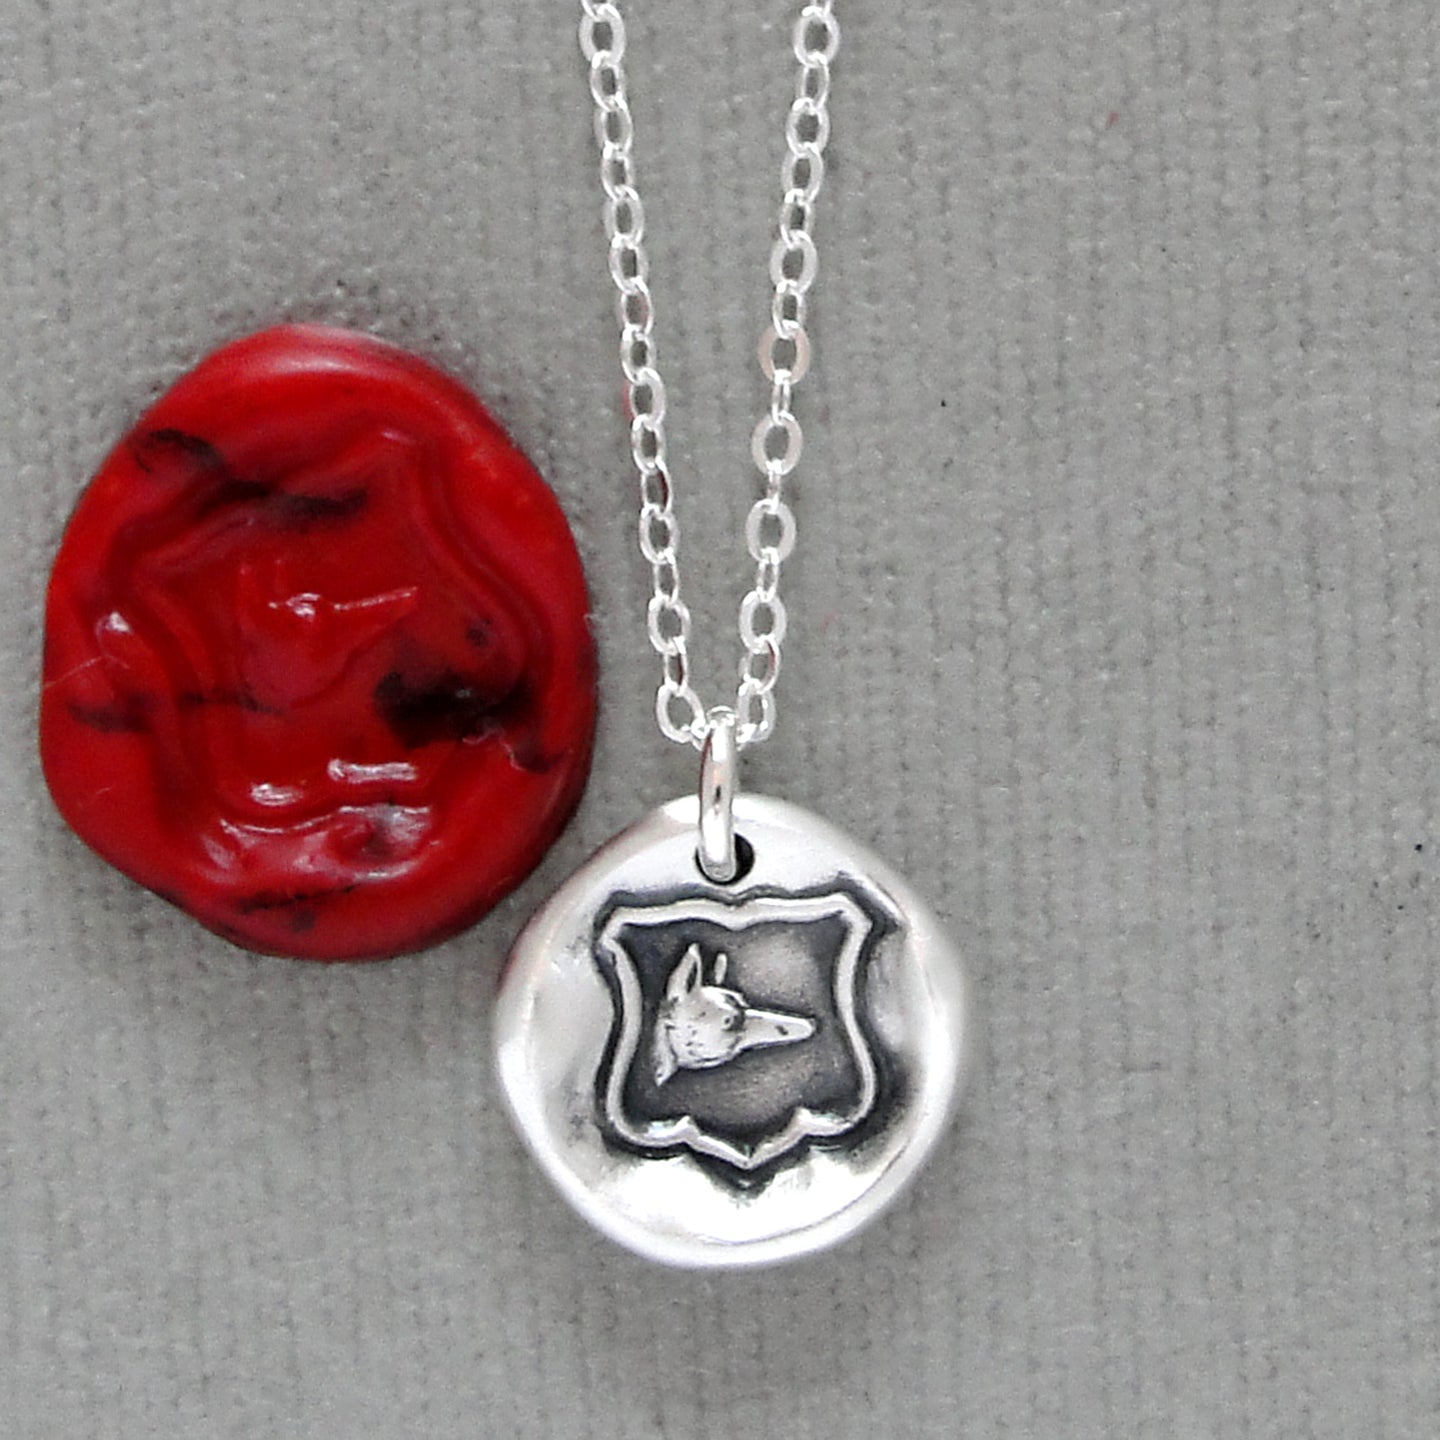 Fox Wax Seal Necklace - Clever Quick Witted Wise Tiny Fox Silver Wax Seal Jewelry